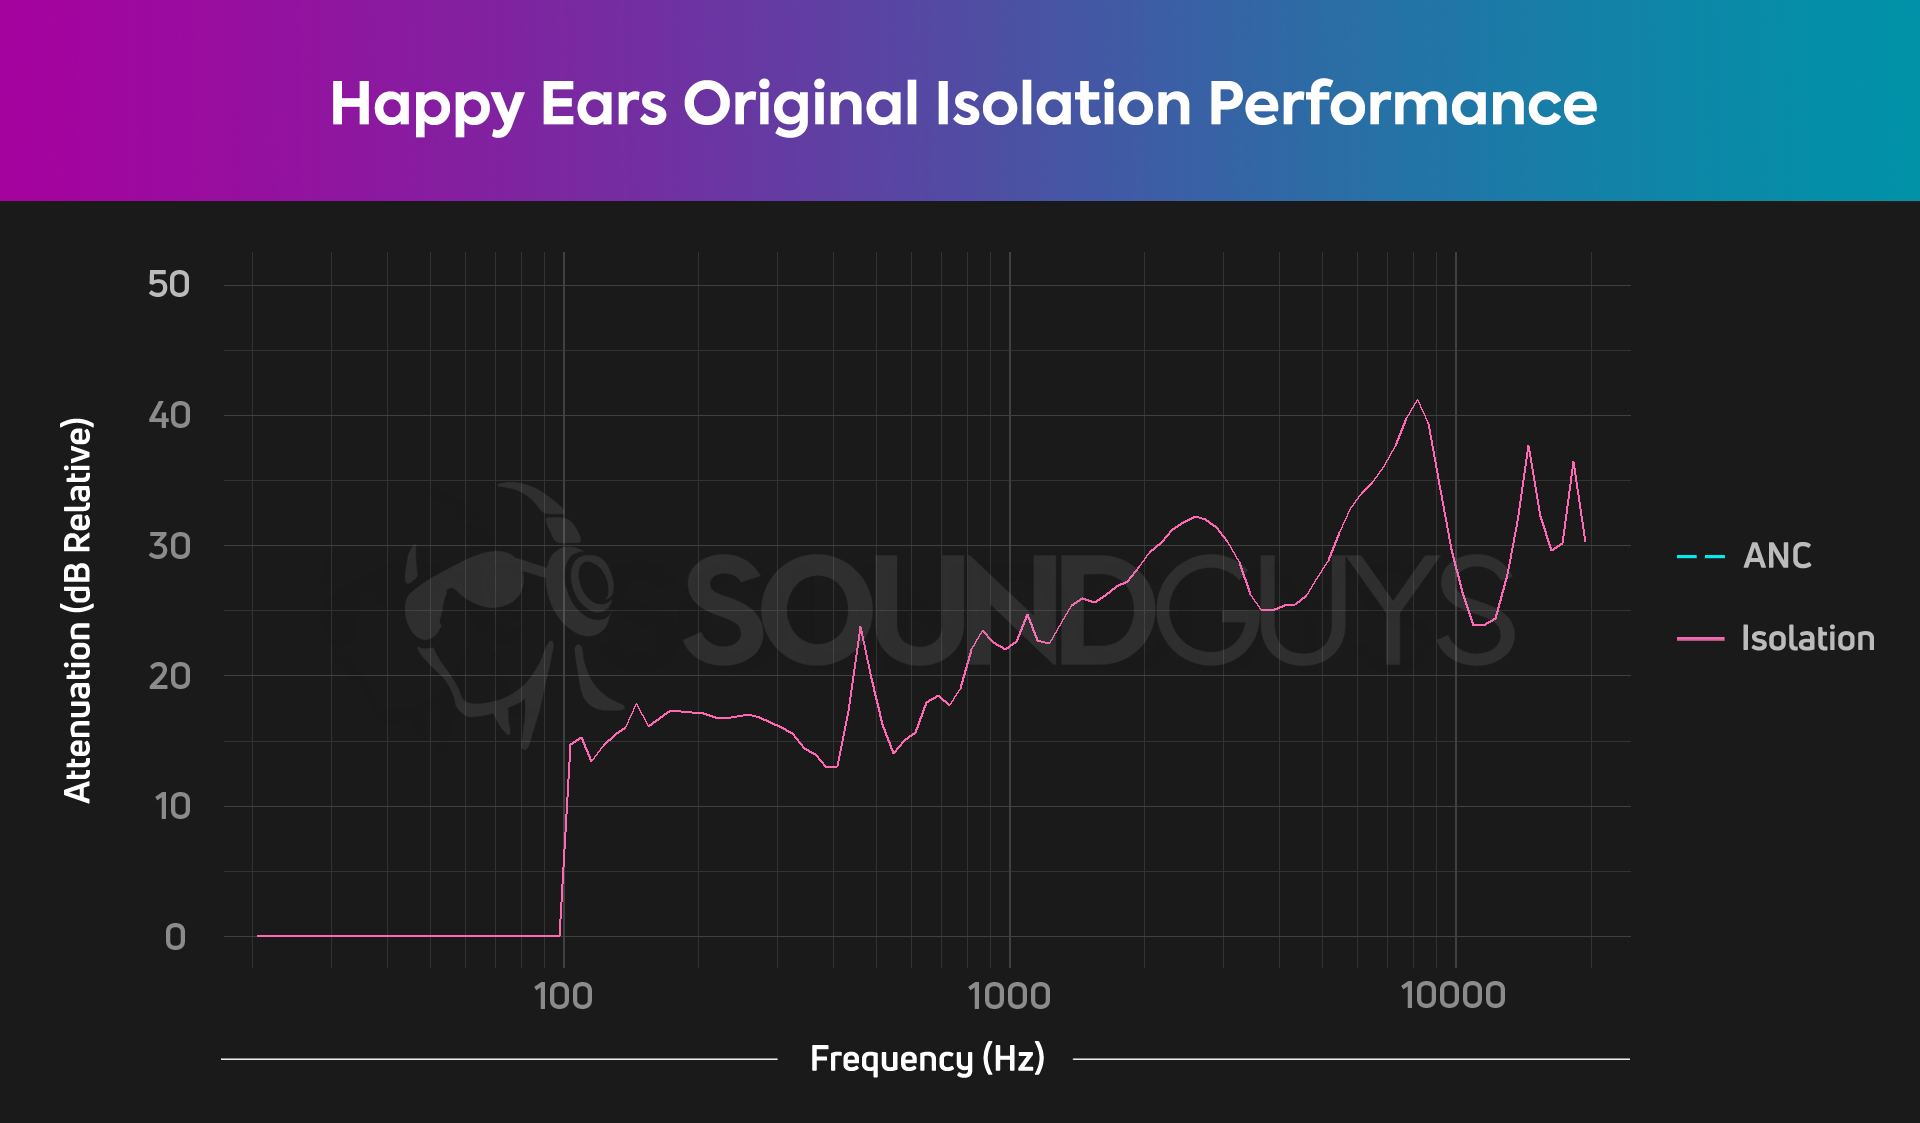 Happy ears review: Are these earplugs better than Loop? - Reviewed